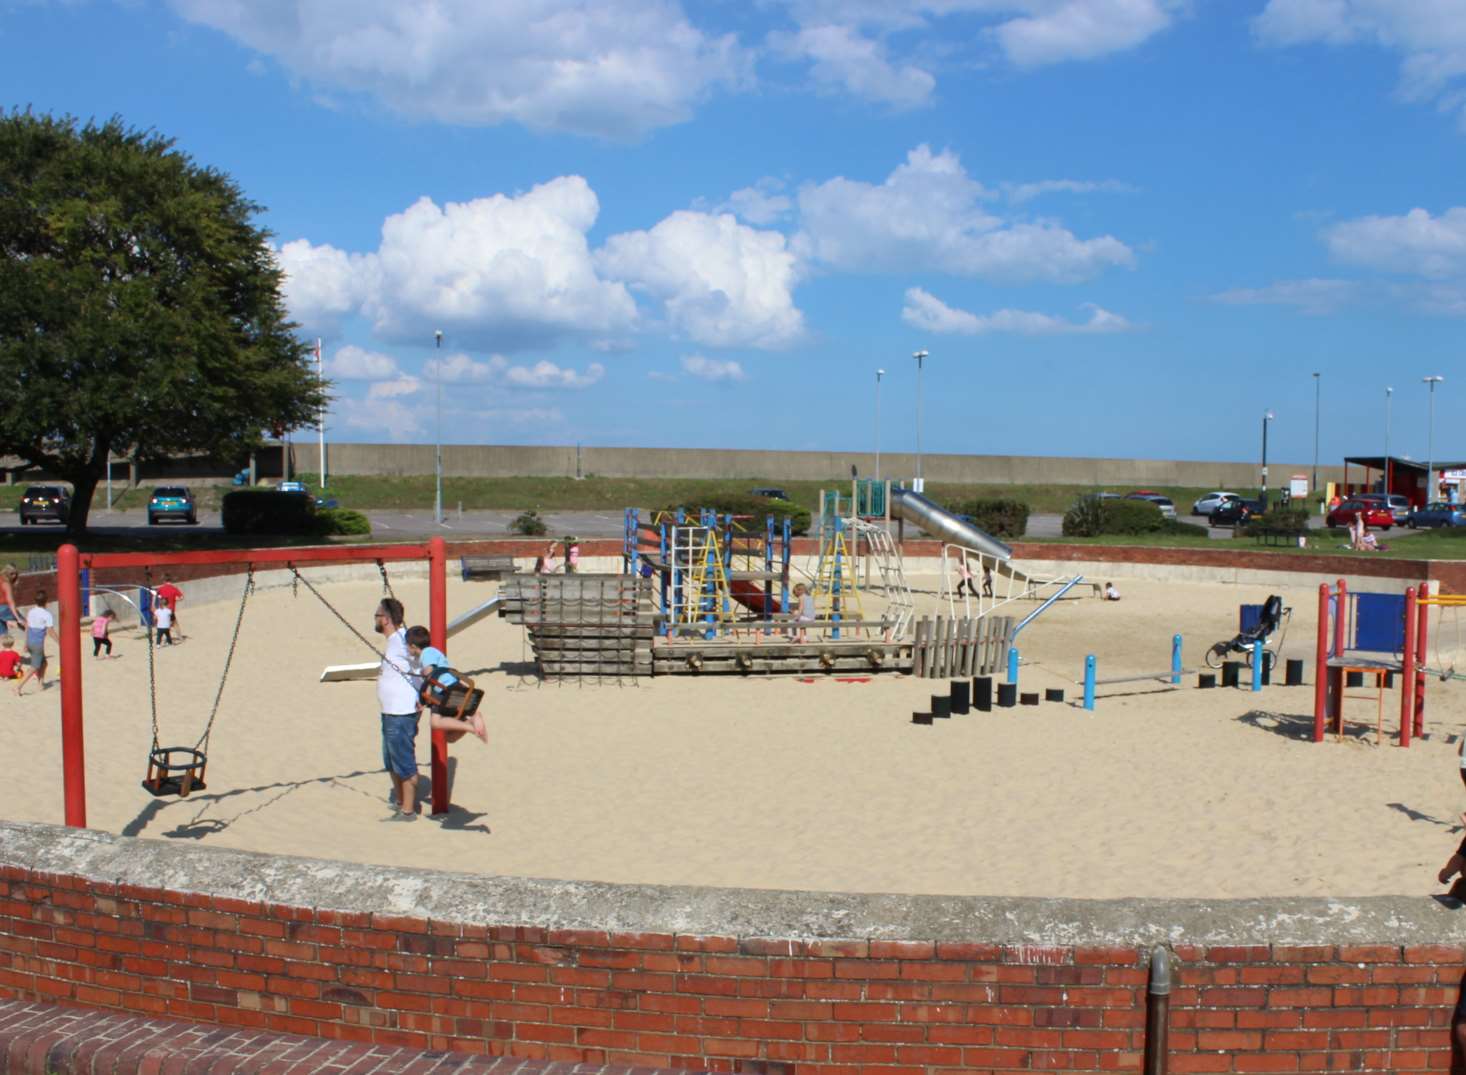 Sheerness: The sandpit - popular with many. Used to be a boating lake.